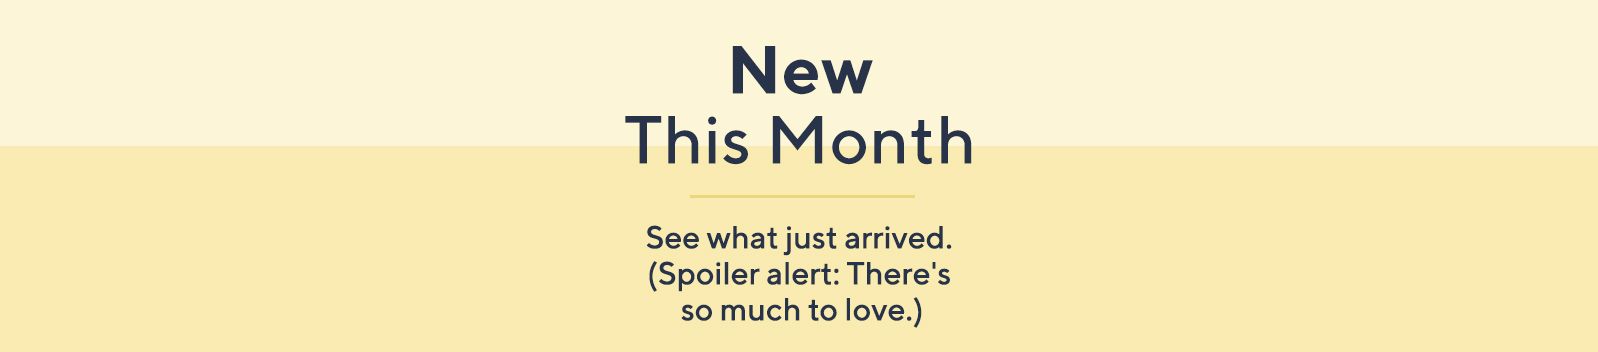 New This Month:  See what just arrived. (Spoiler alert: There's so much to love.)